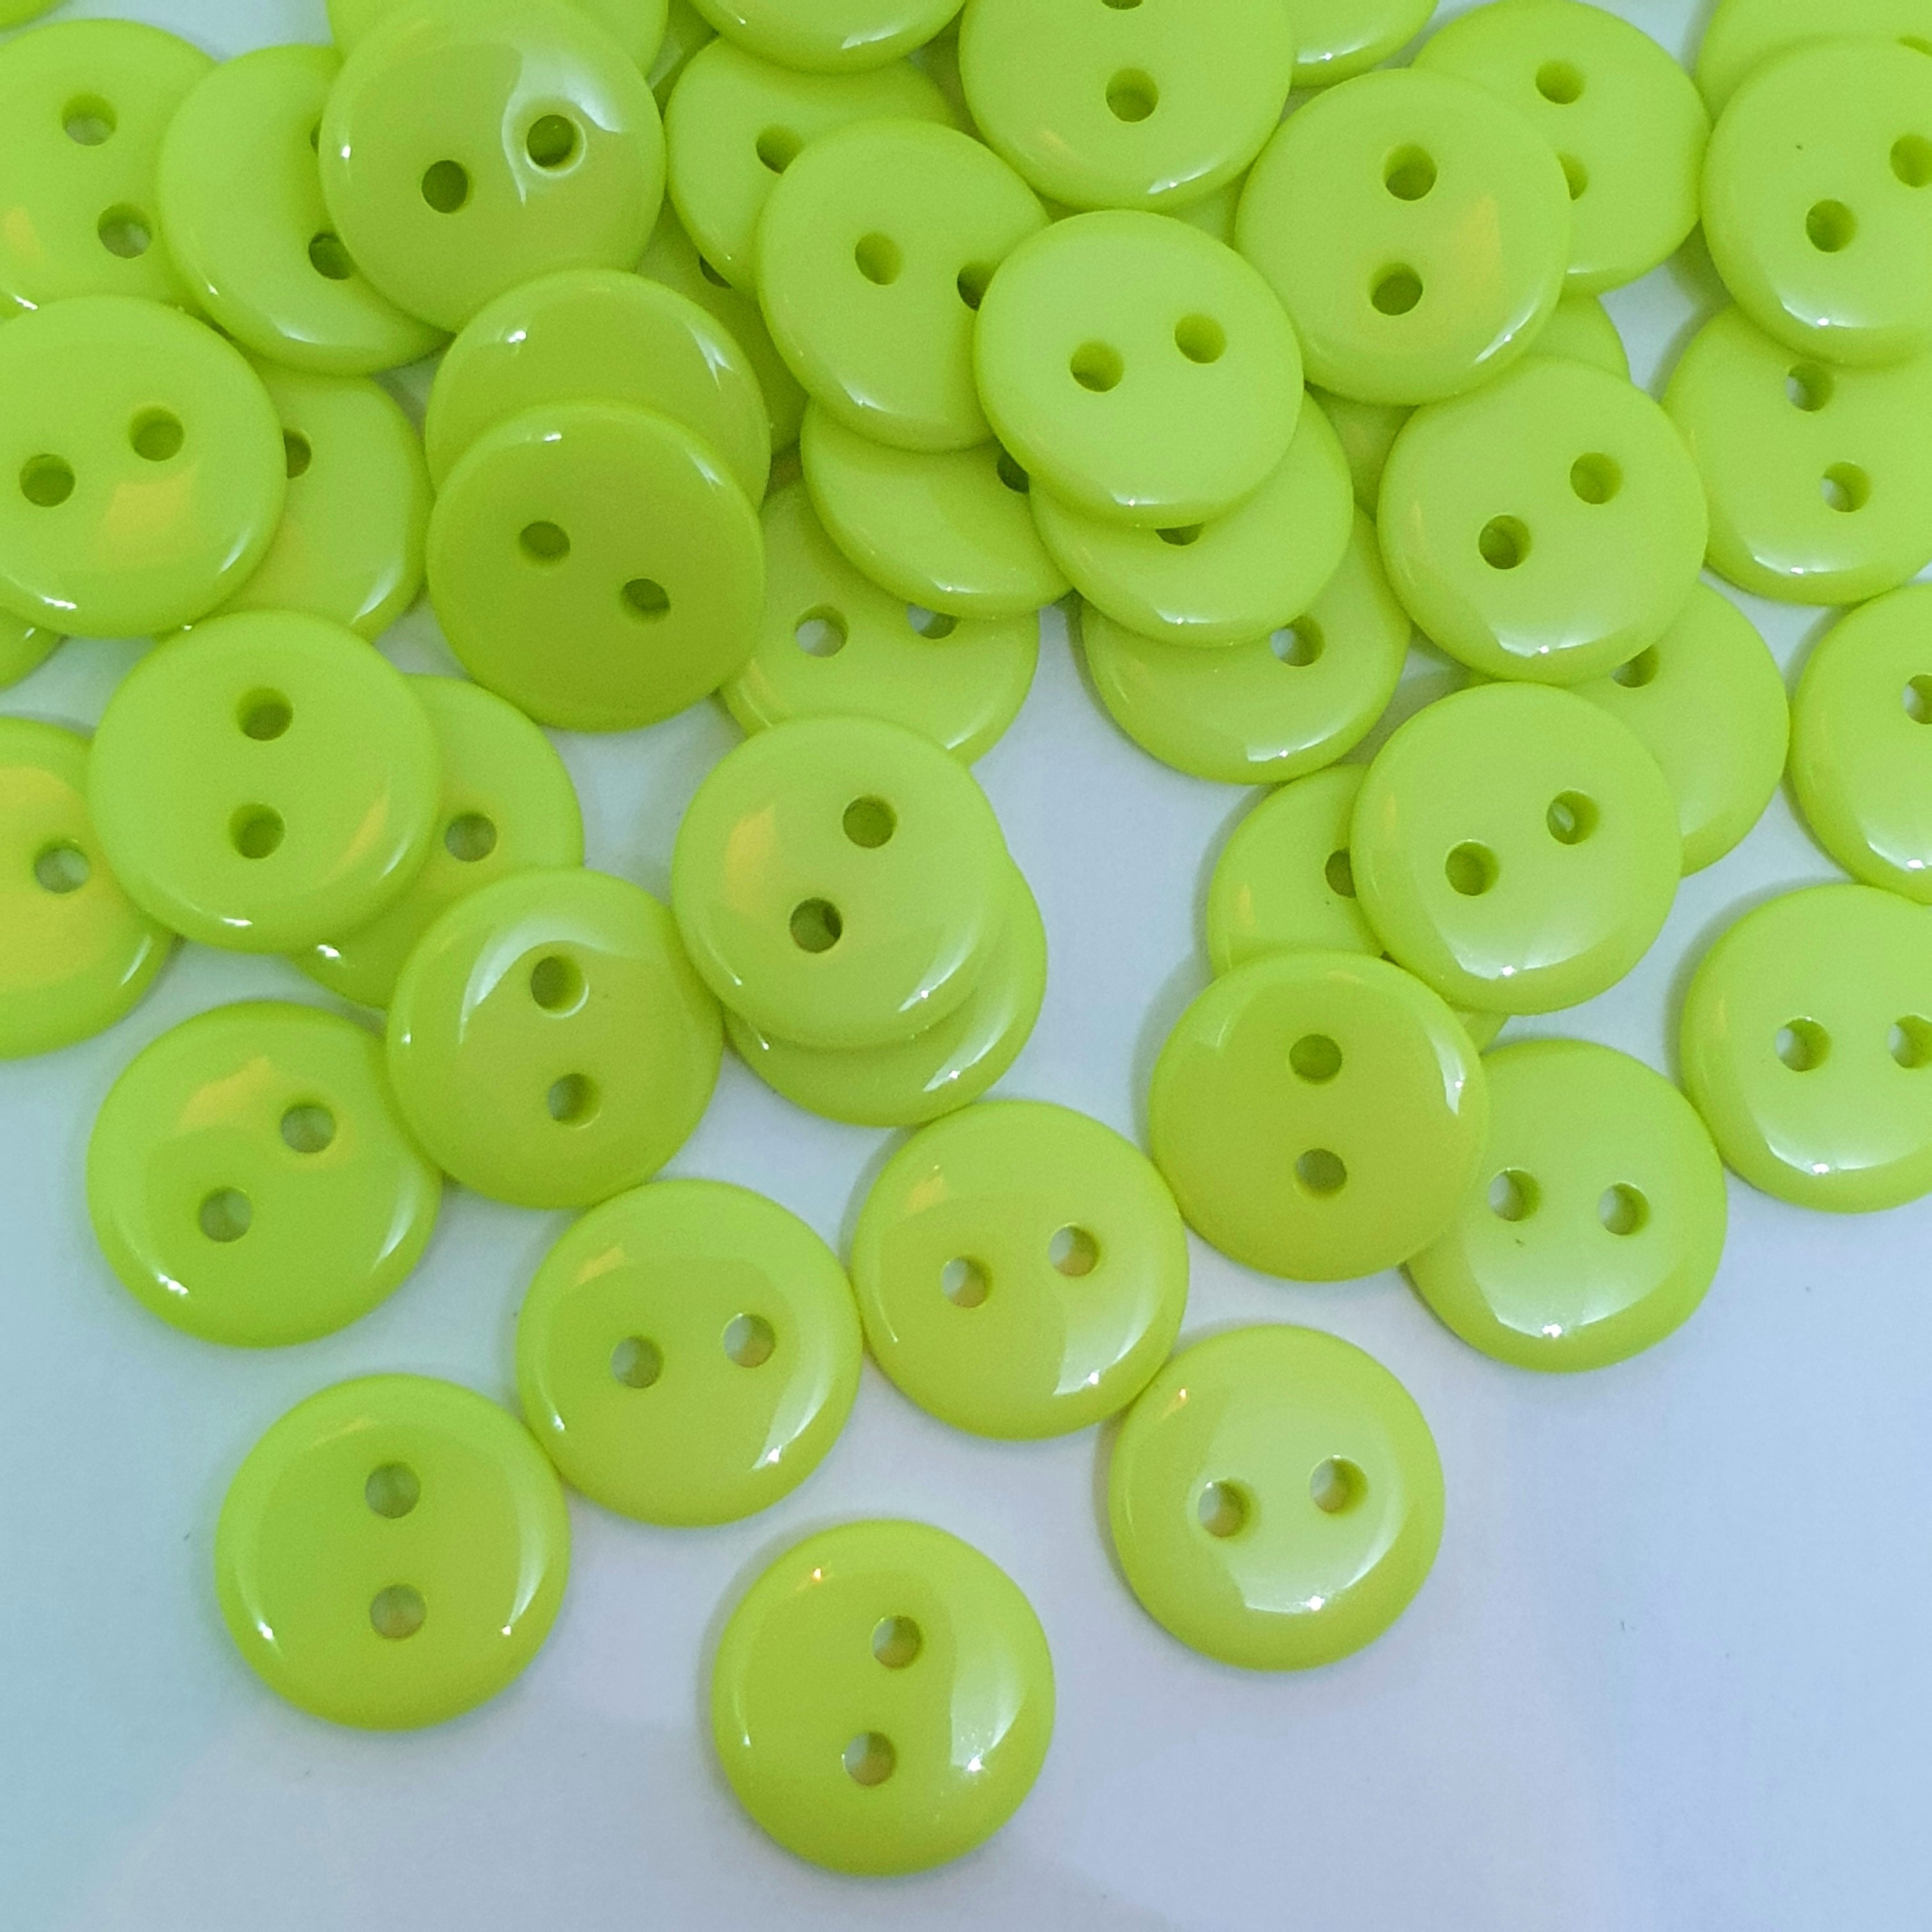 MajorCrafts 120pcs 10mm Yellow Green 2 Holes Small Round Resin Sewing Buttons B10